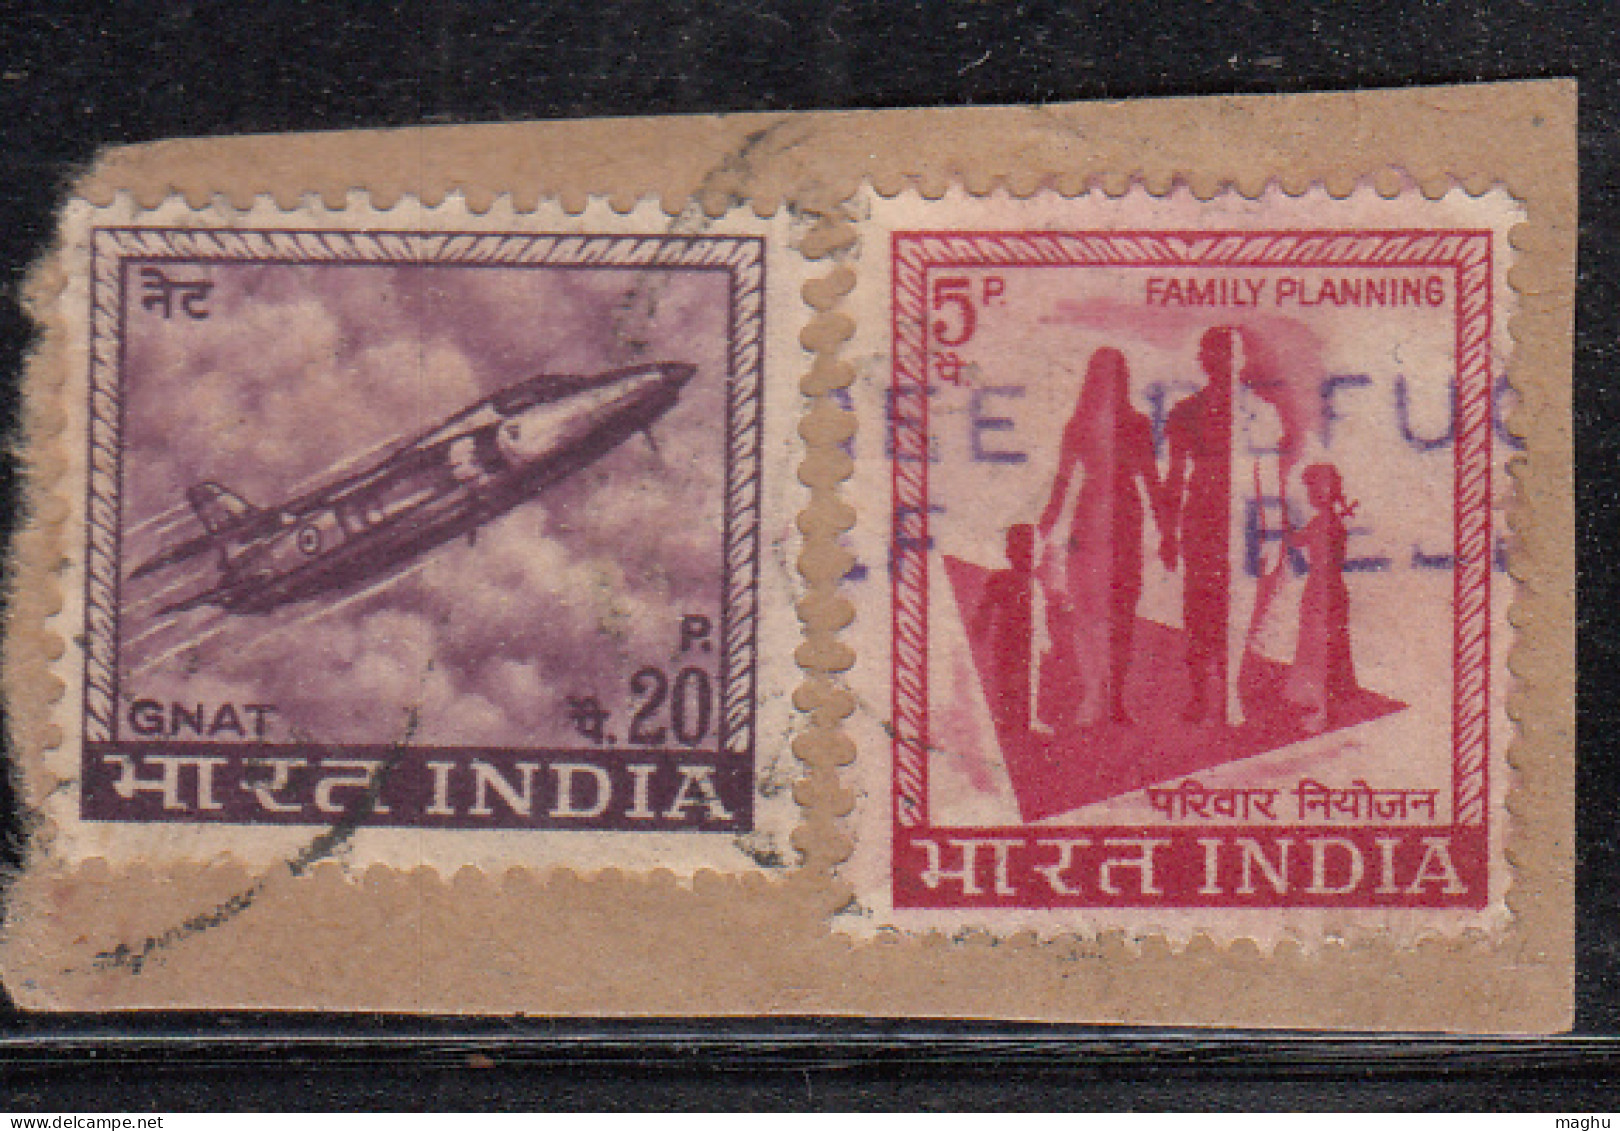 Refugee Relief Used On Piece, India RRT - Francobolli Di Beneficenza